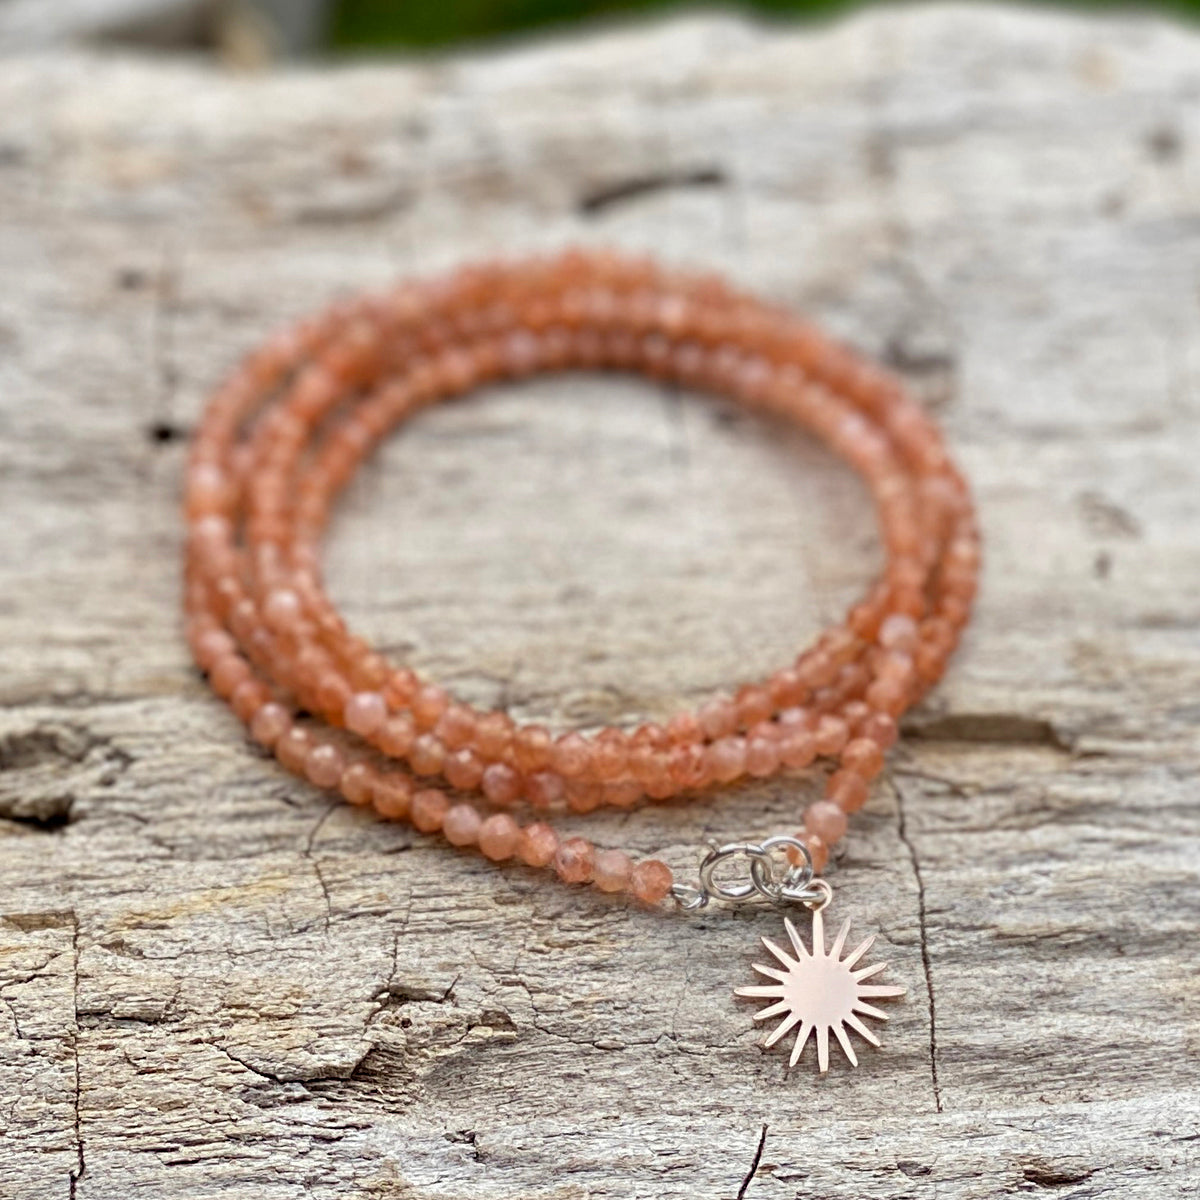 Sunstone Sunshine Happiness Wrap Bracelet to allow your real self to shine through happily. The Sunstone crystal stone meaning helps you to clear away limitations and negative energies by replacing them with light and high vibrations. May this sunstone wrap bracelet add a little more brightness to your inner spirit.